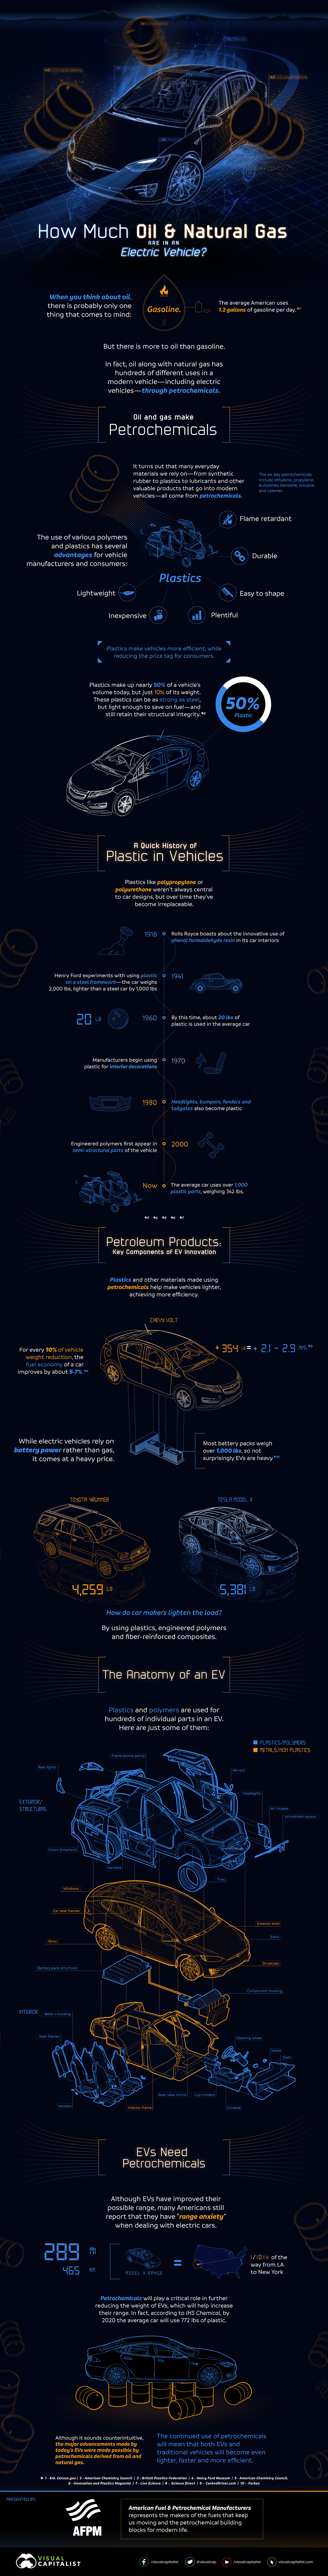 How Much Oil is in an Electric Vehicle?